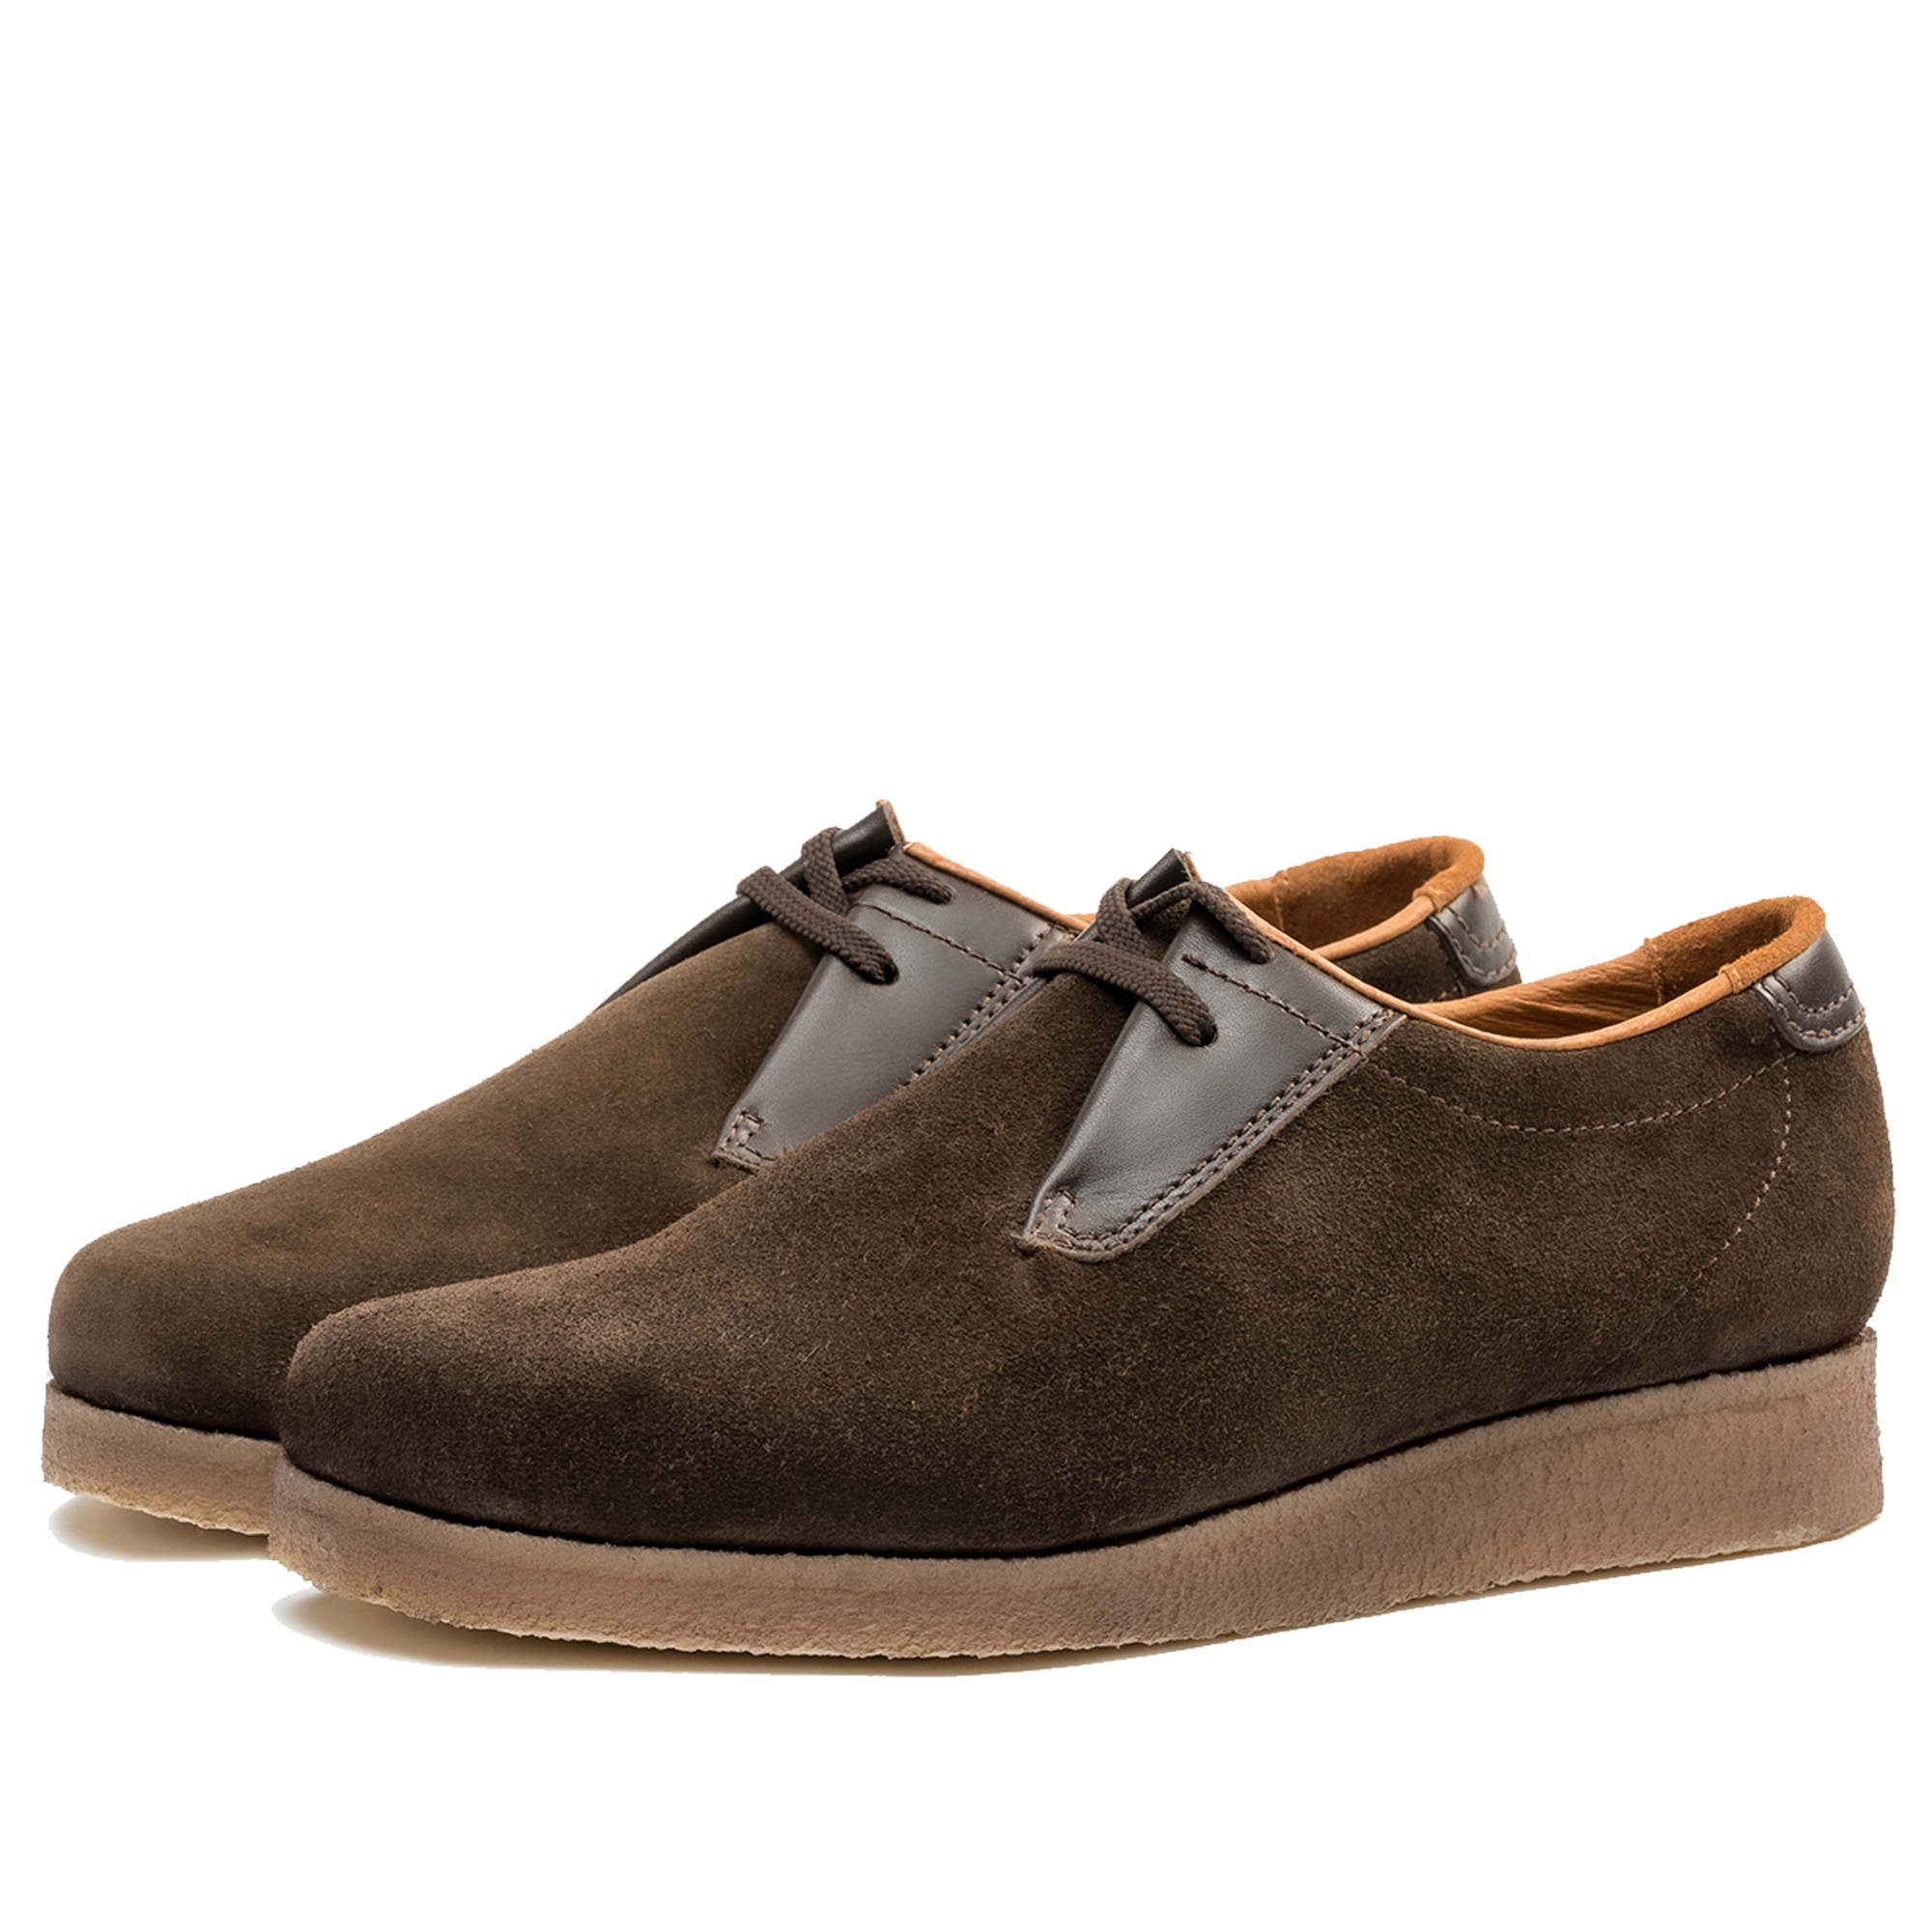 P500 Padmore & Barnes Original Sports Shoe – Brown Suede with Leather ...